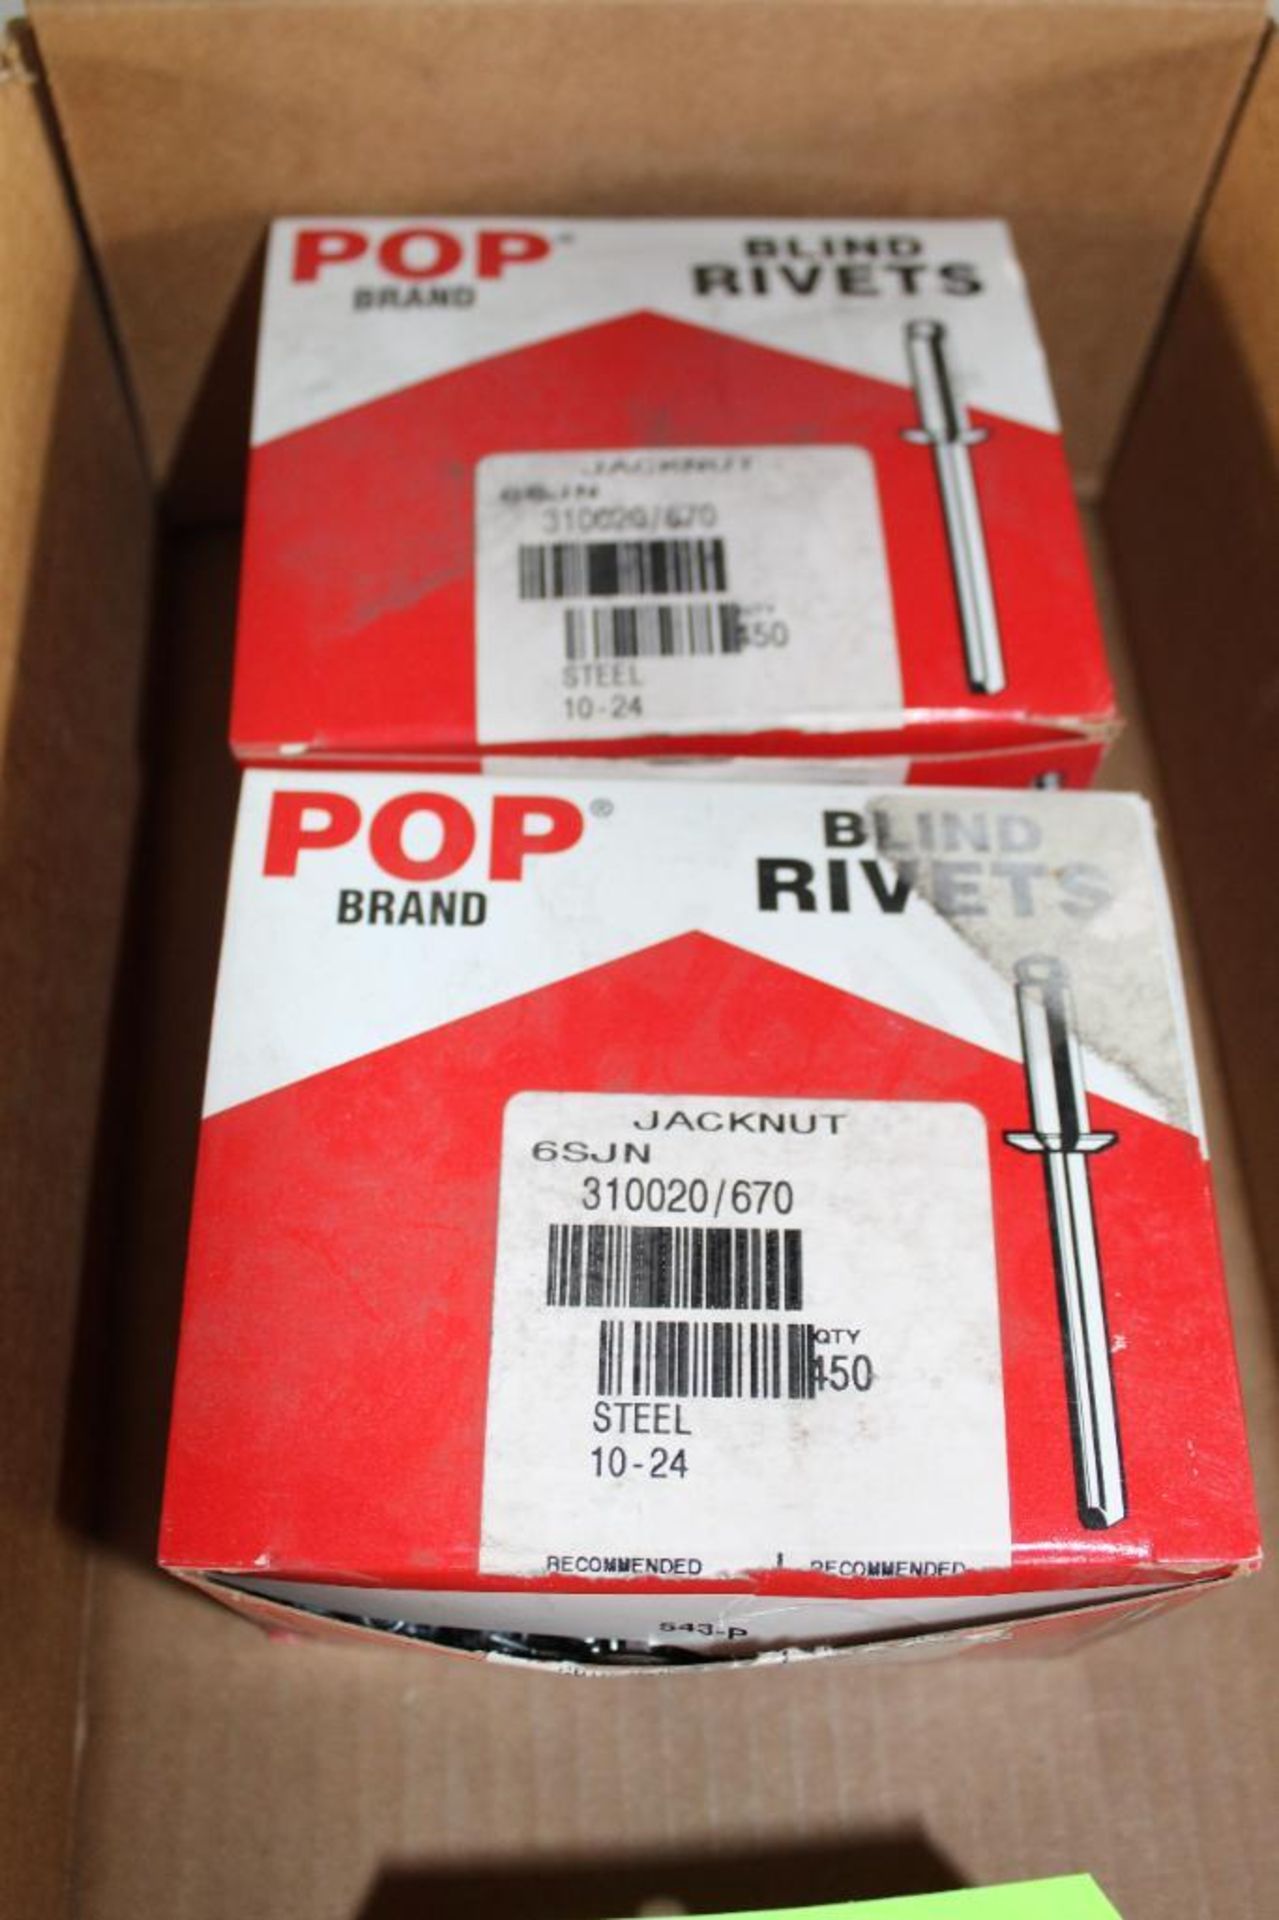 Lot of (2) Opened Boxes Pop Brand Blind Rivets Jacknuts 6SJN - Image 3 of 3